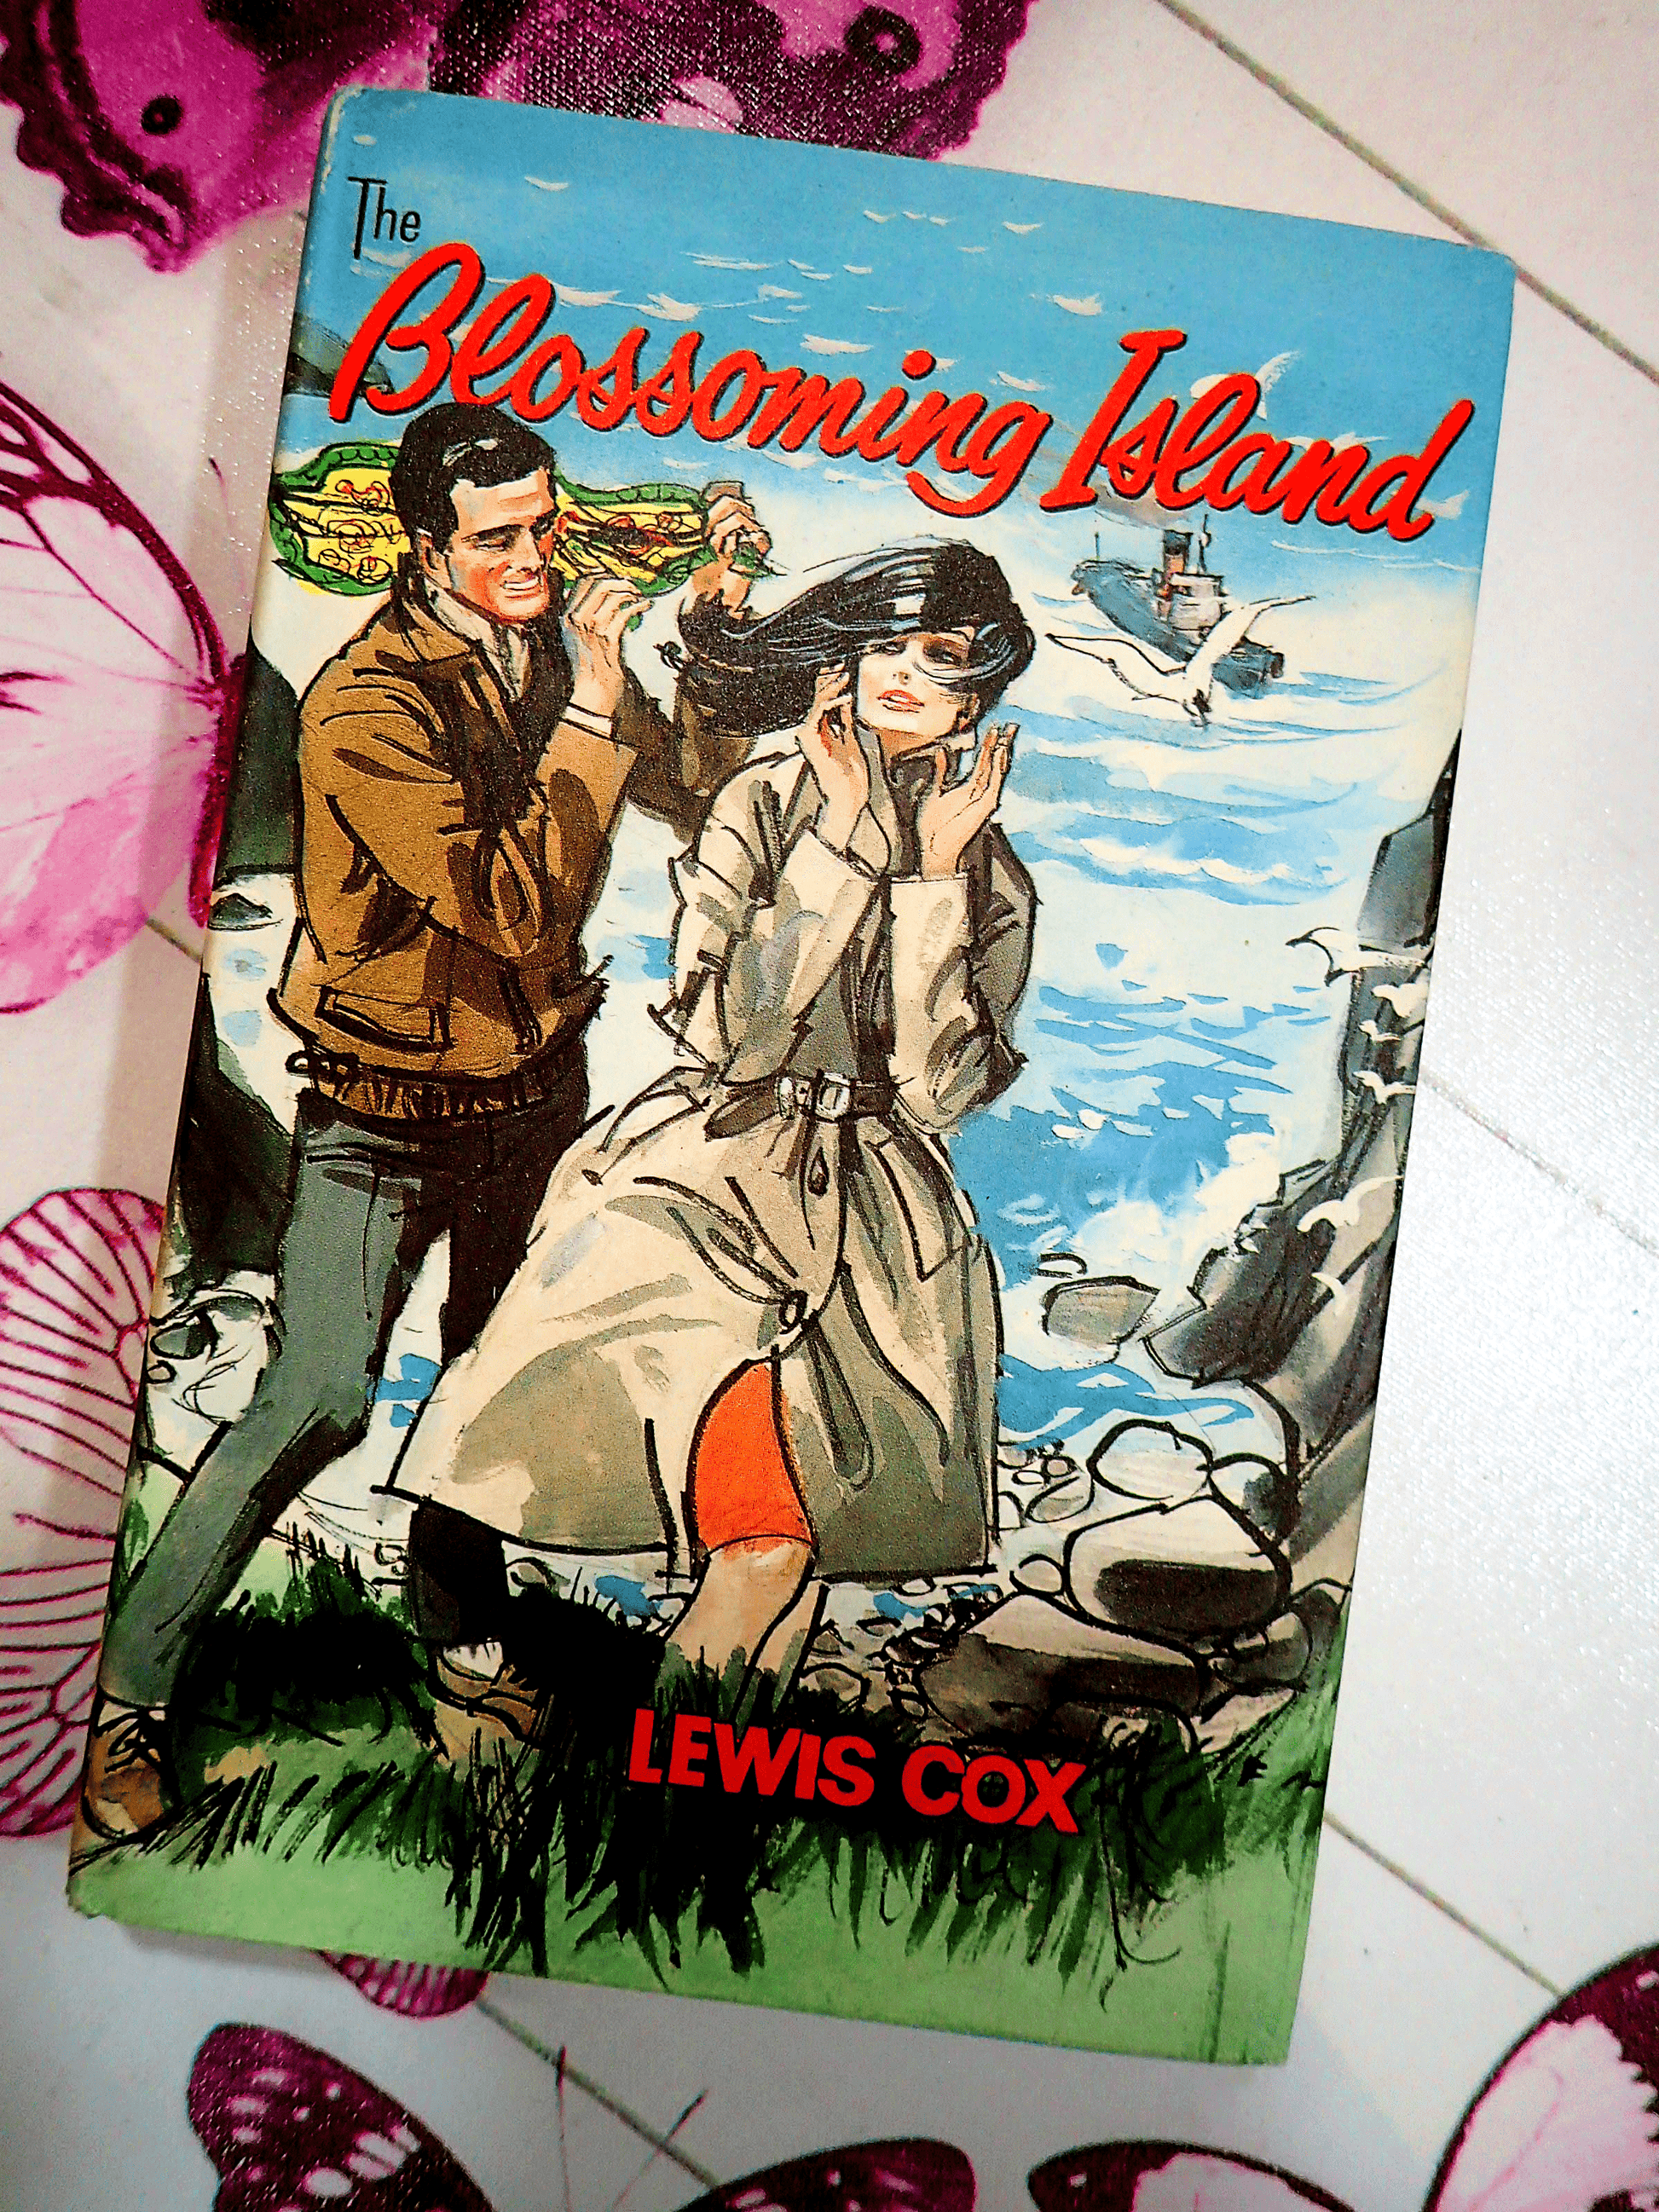 Front cover of Blossoming Island Lewis Cox Romance Book Club Hardback showing a man and woman on a cliff top. 